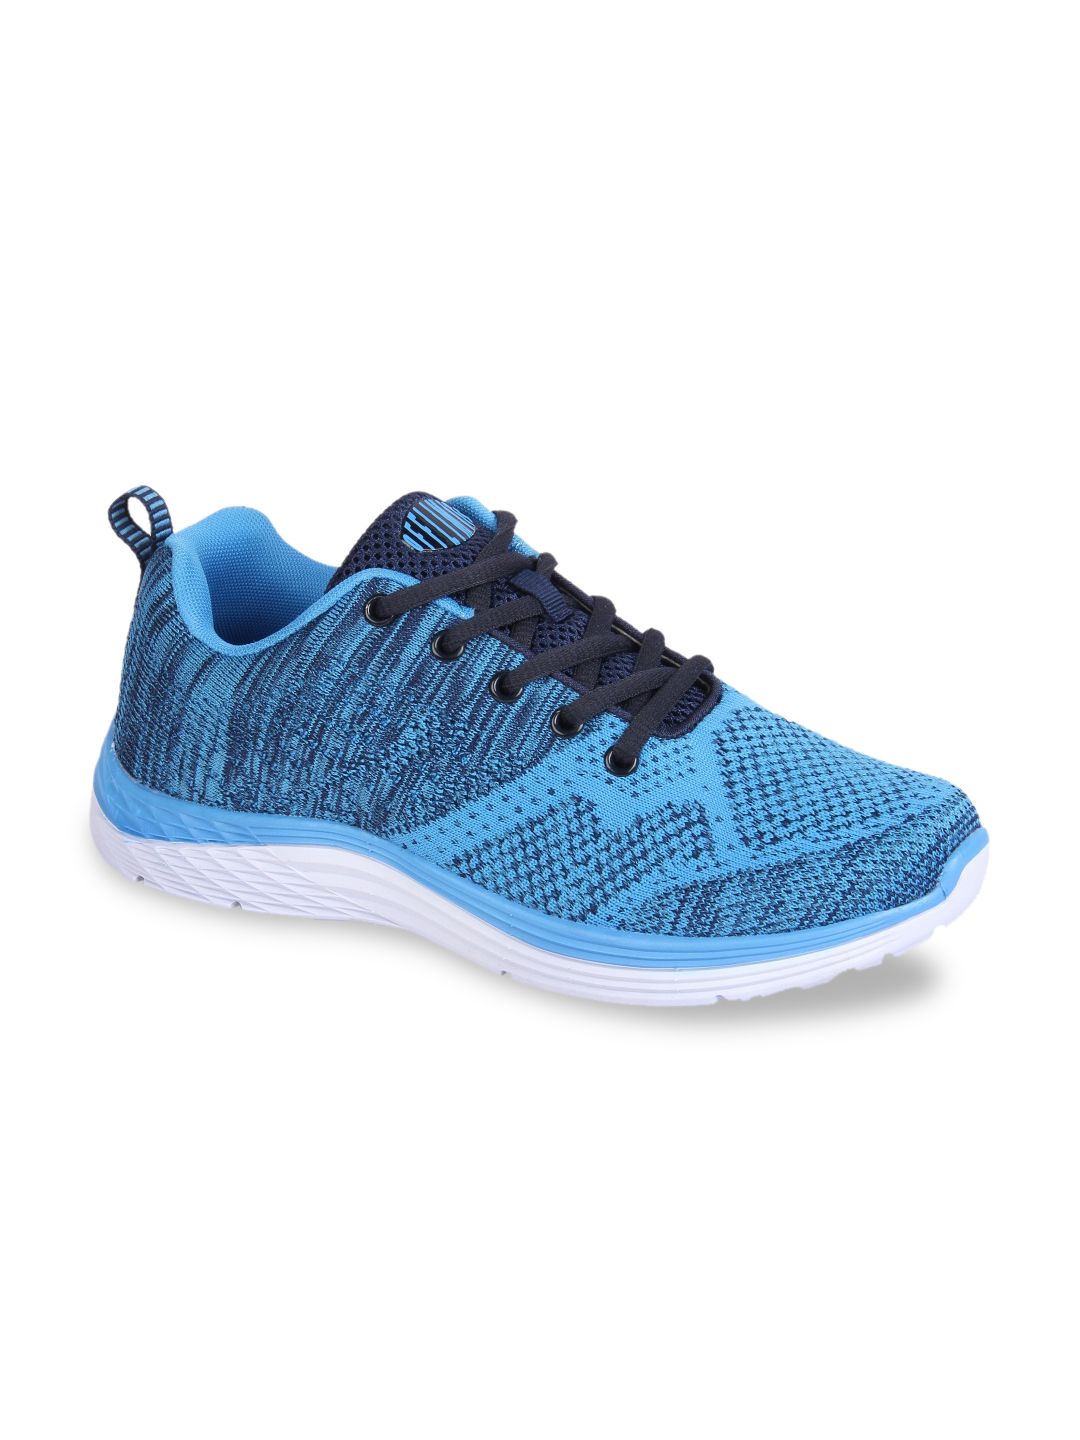 OFF LIMITS Women Navy Blue Running Shoes Price in India